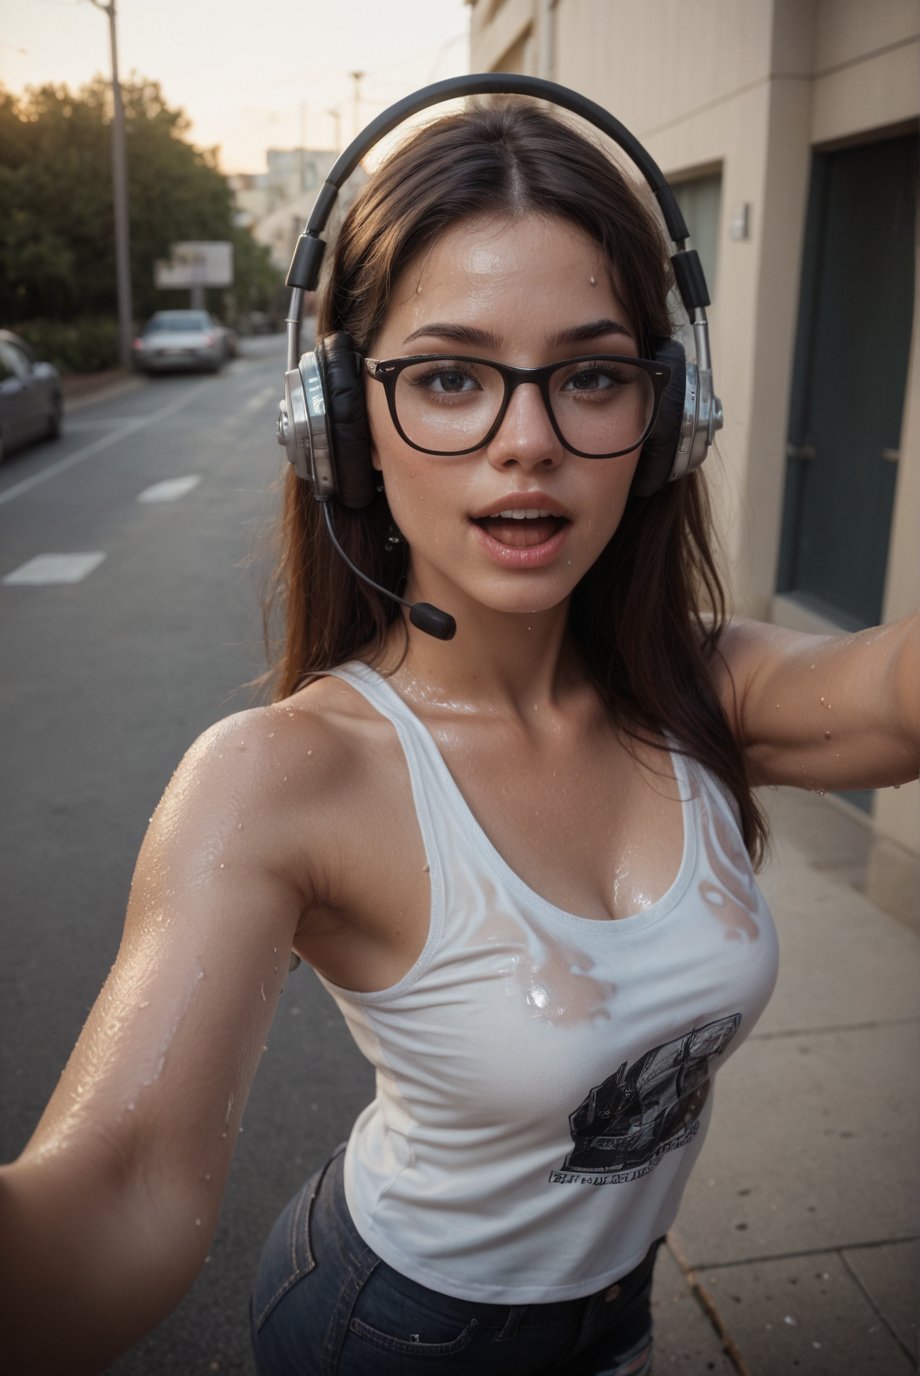 score_9,score_8_up, score_7_up, score_6_up, score_5_up, score_4_up,hyper realism, photo realistic, 8k, digital slr, 1girl, brunette woman, glasses, singing, headphones, selfie arm, fisheye view, from above, white tank top, sweaty, sweaty brow, sweat dripping from chin, sweat stained wet clothes, outdoors, on sidewalk, converse all stars, 